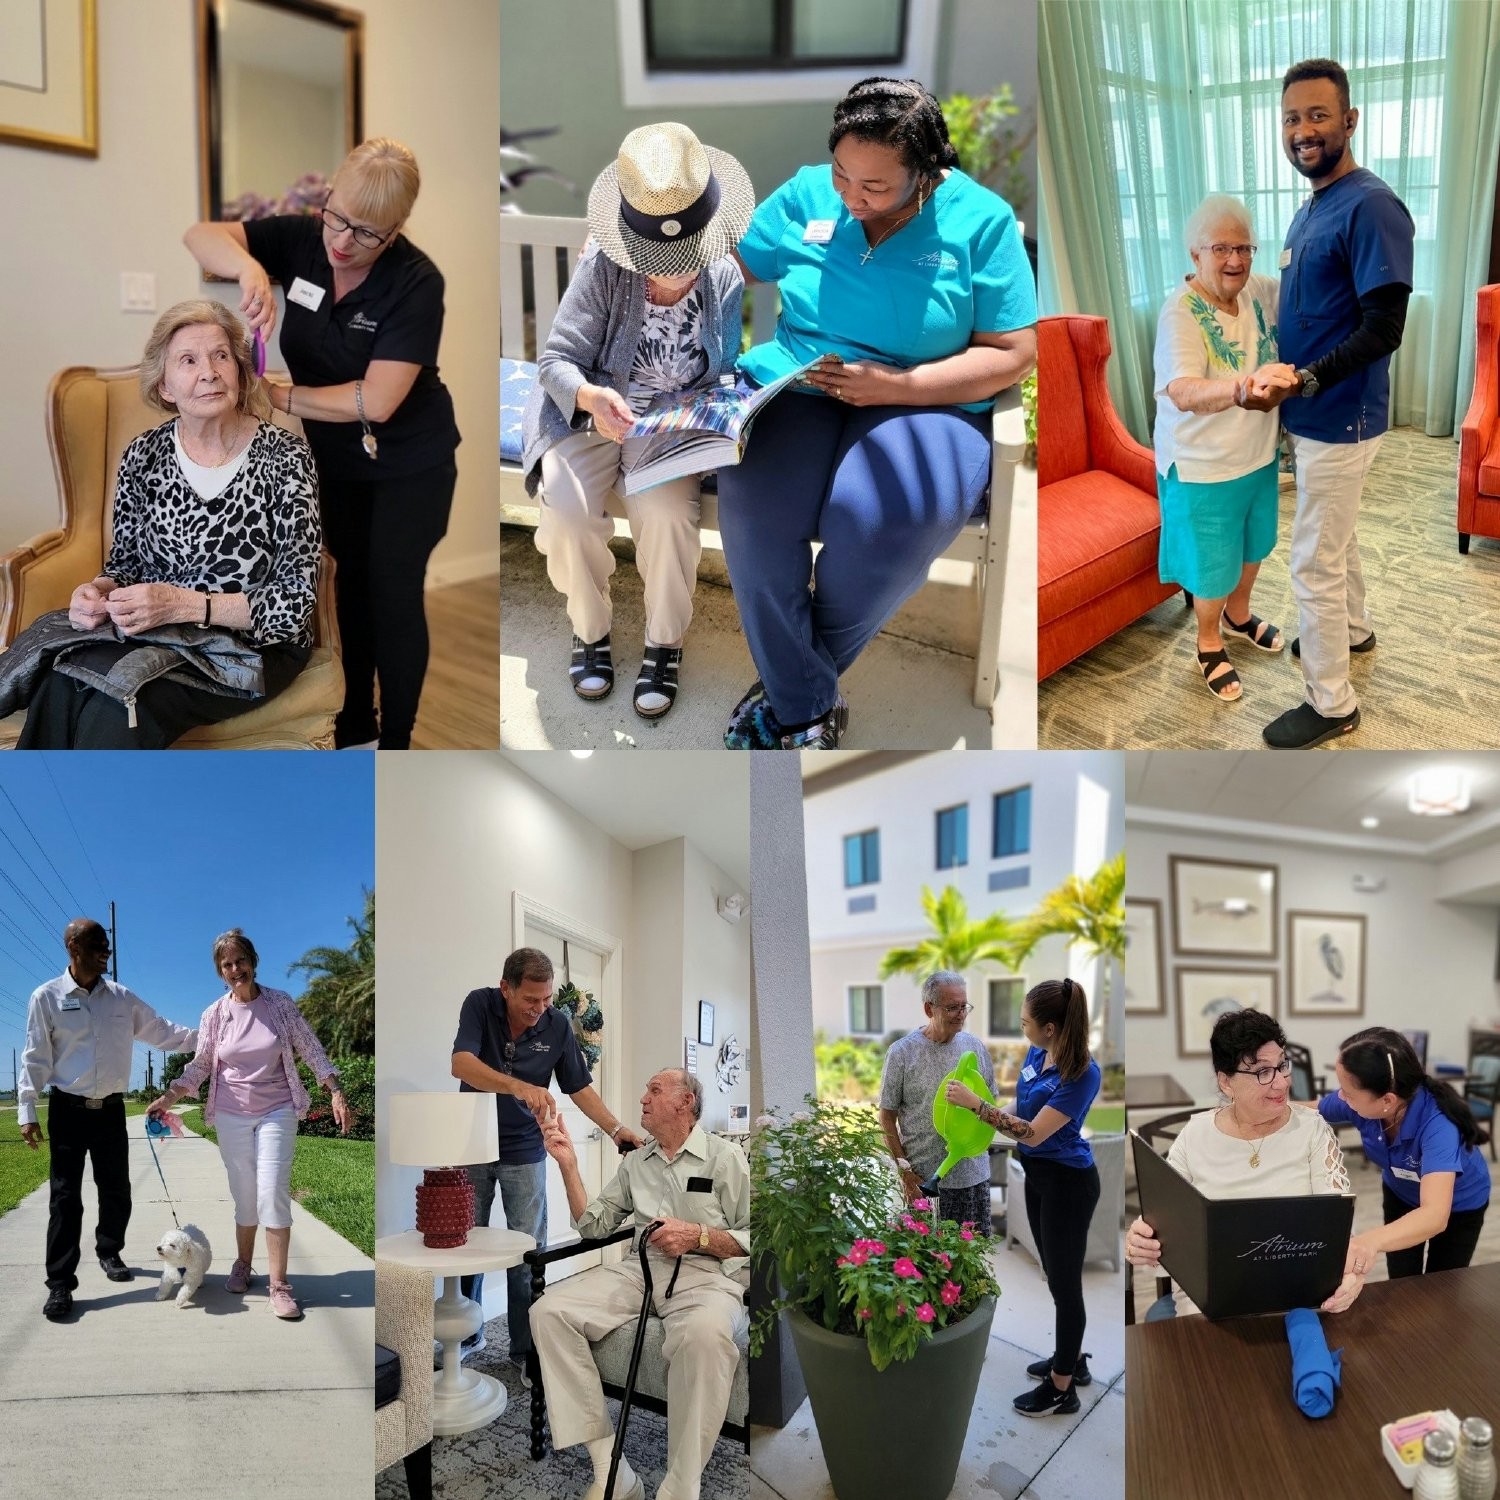 Connecting with our residents is the best part of the job!